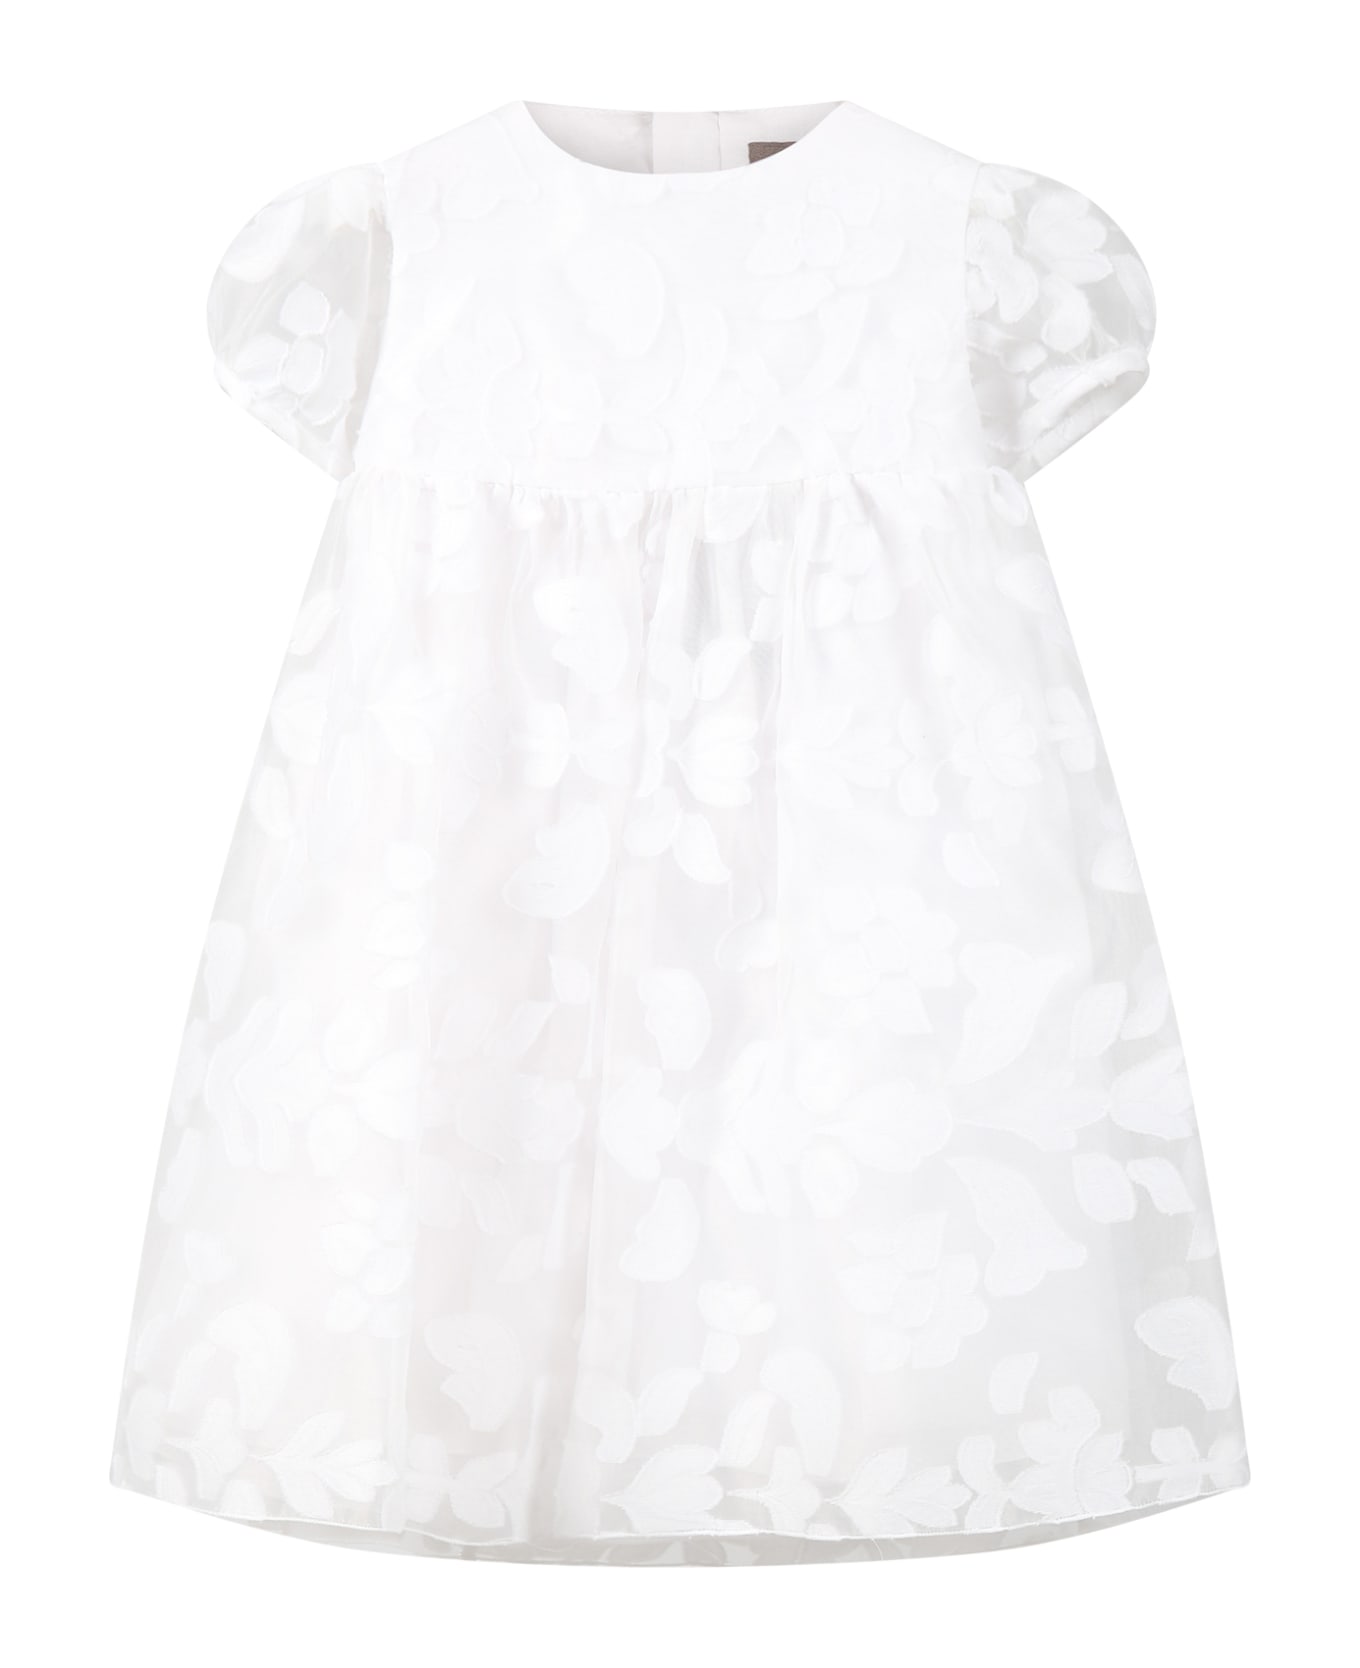 Little Bear White Dress For Baby Girl With Floral Details - White ウェア